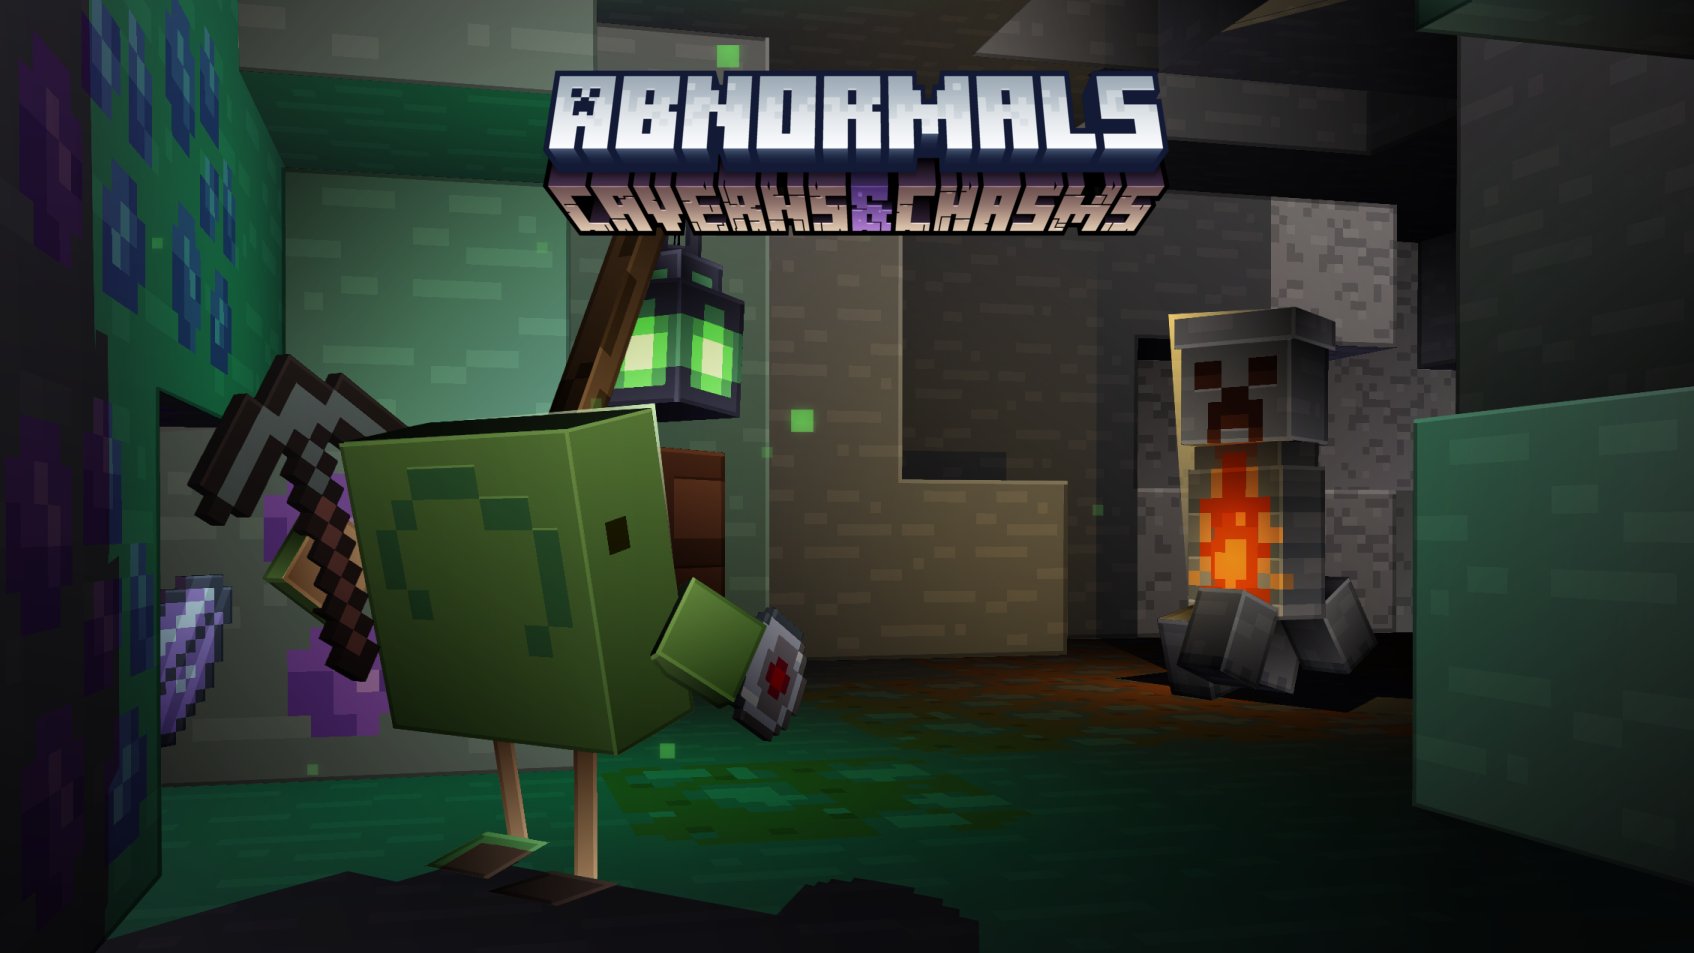 Team Abnormals Introducing Caverns And Chasms An Upcoming Mod Focused On Expanding The Underground This Mod Will Be Available For Patrons Server Boosters Of Our Discord Shortly Read